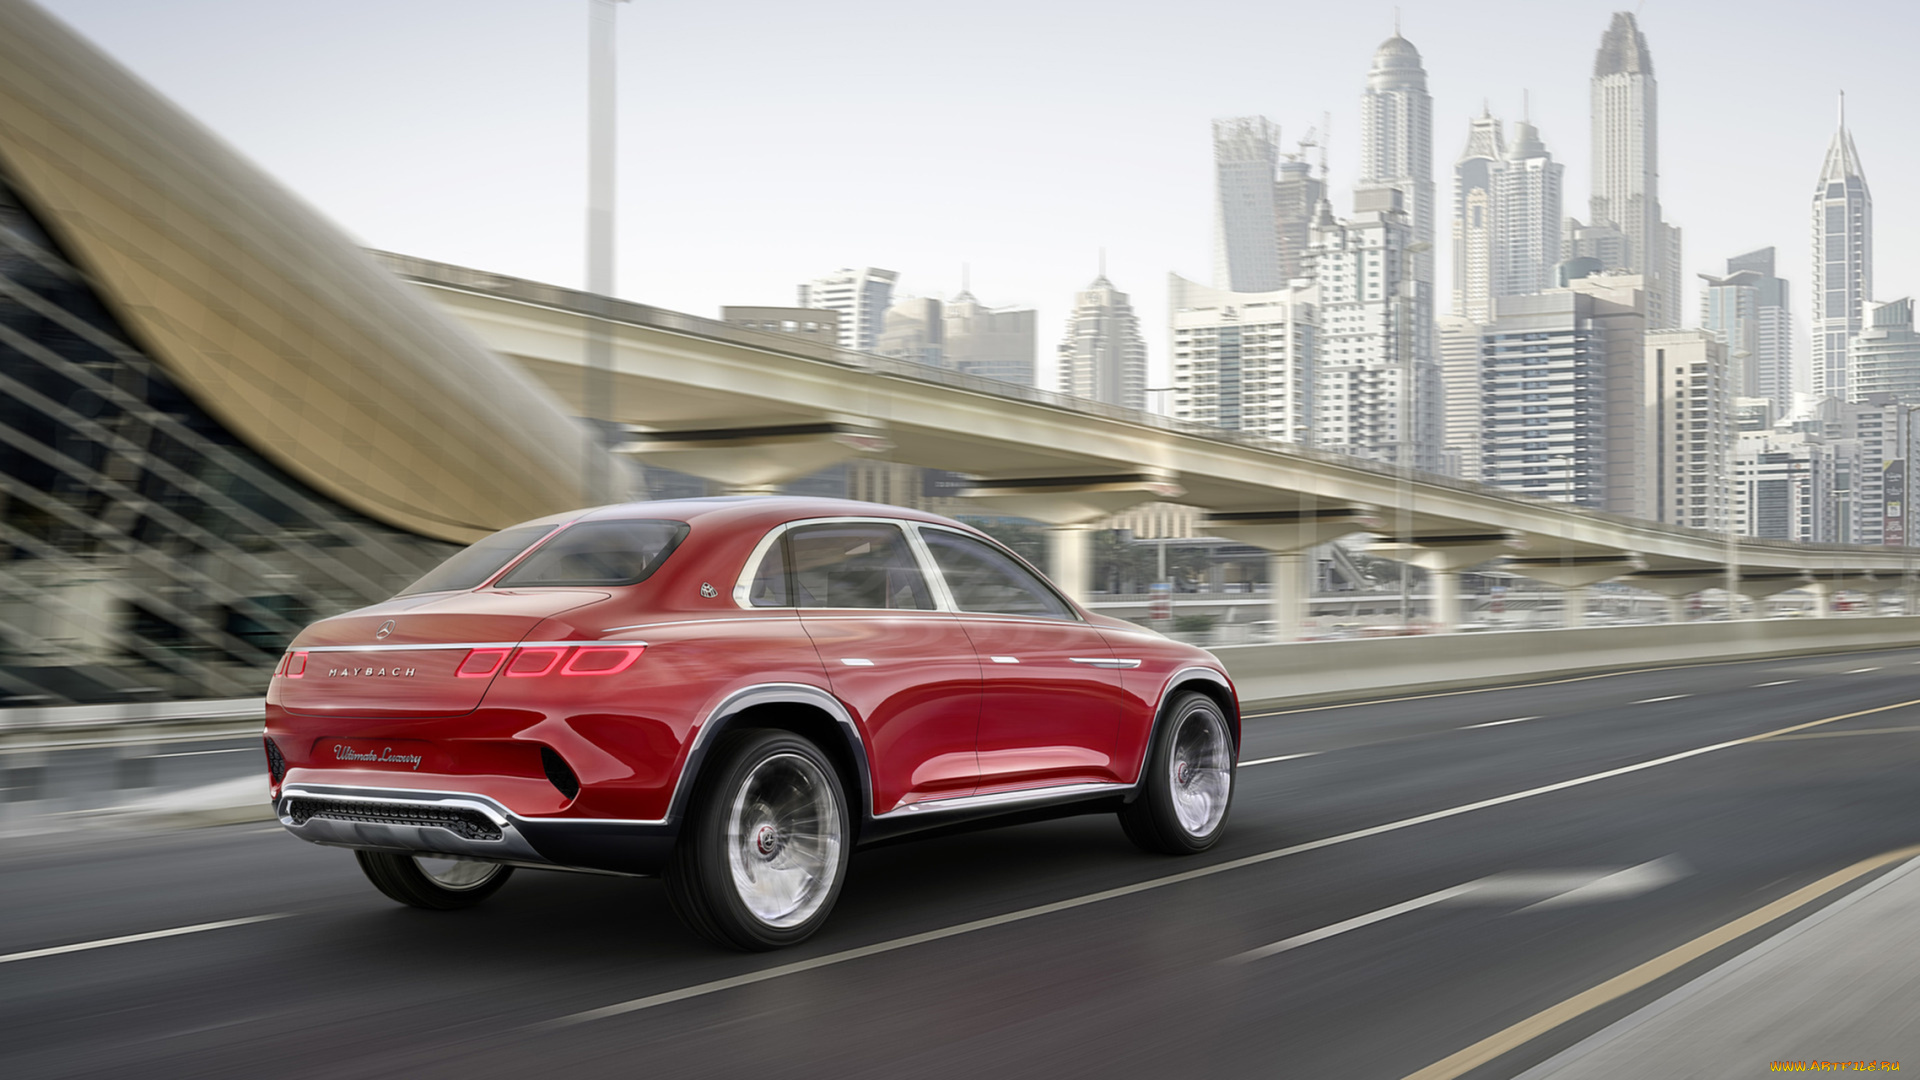 mercedes-maybach, vision, ultimate, luxury, suv, concept, 2018, автомобили, 3д, luxury, 2018, concept, suv, ultimate, vision, mercedes-maybach